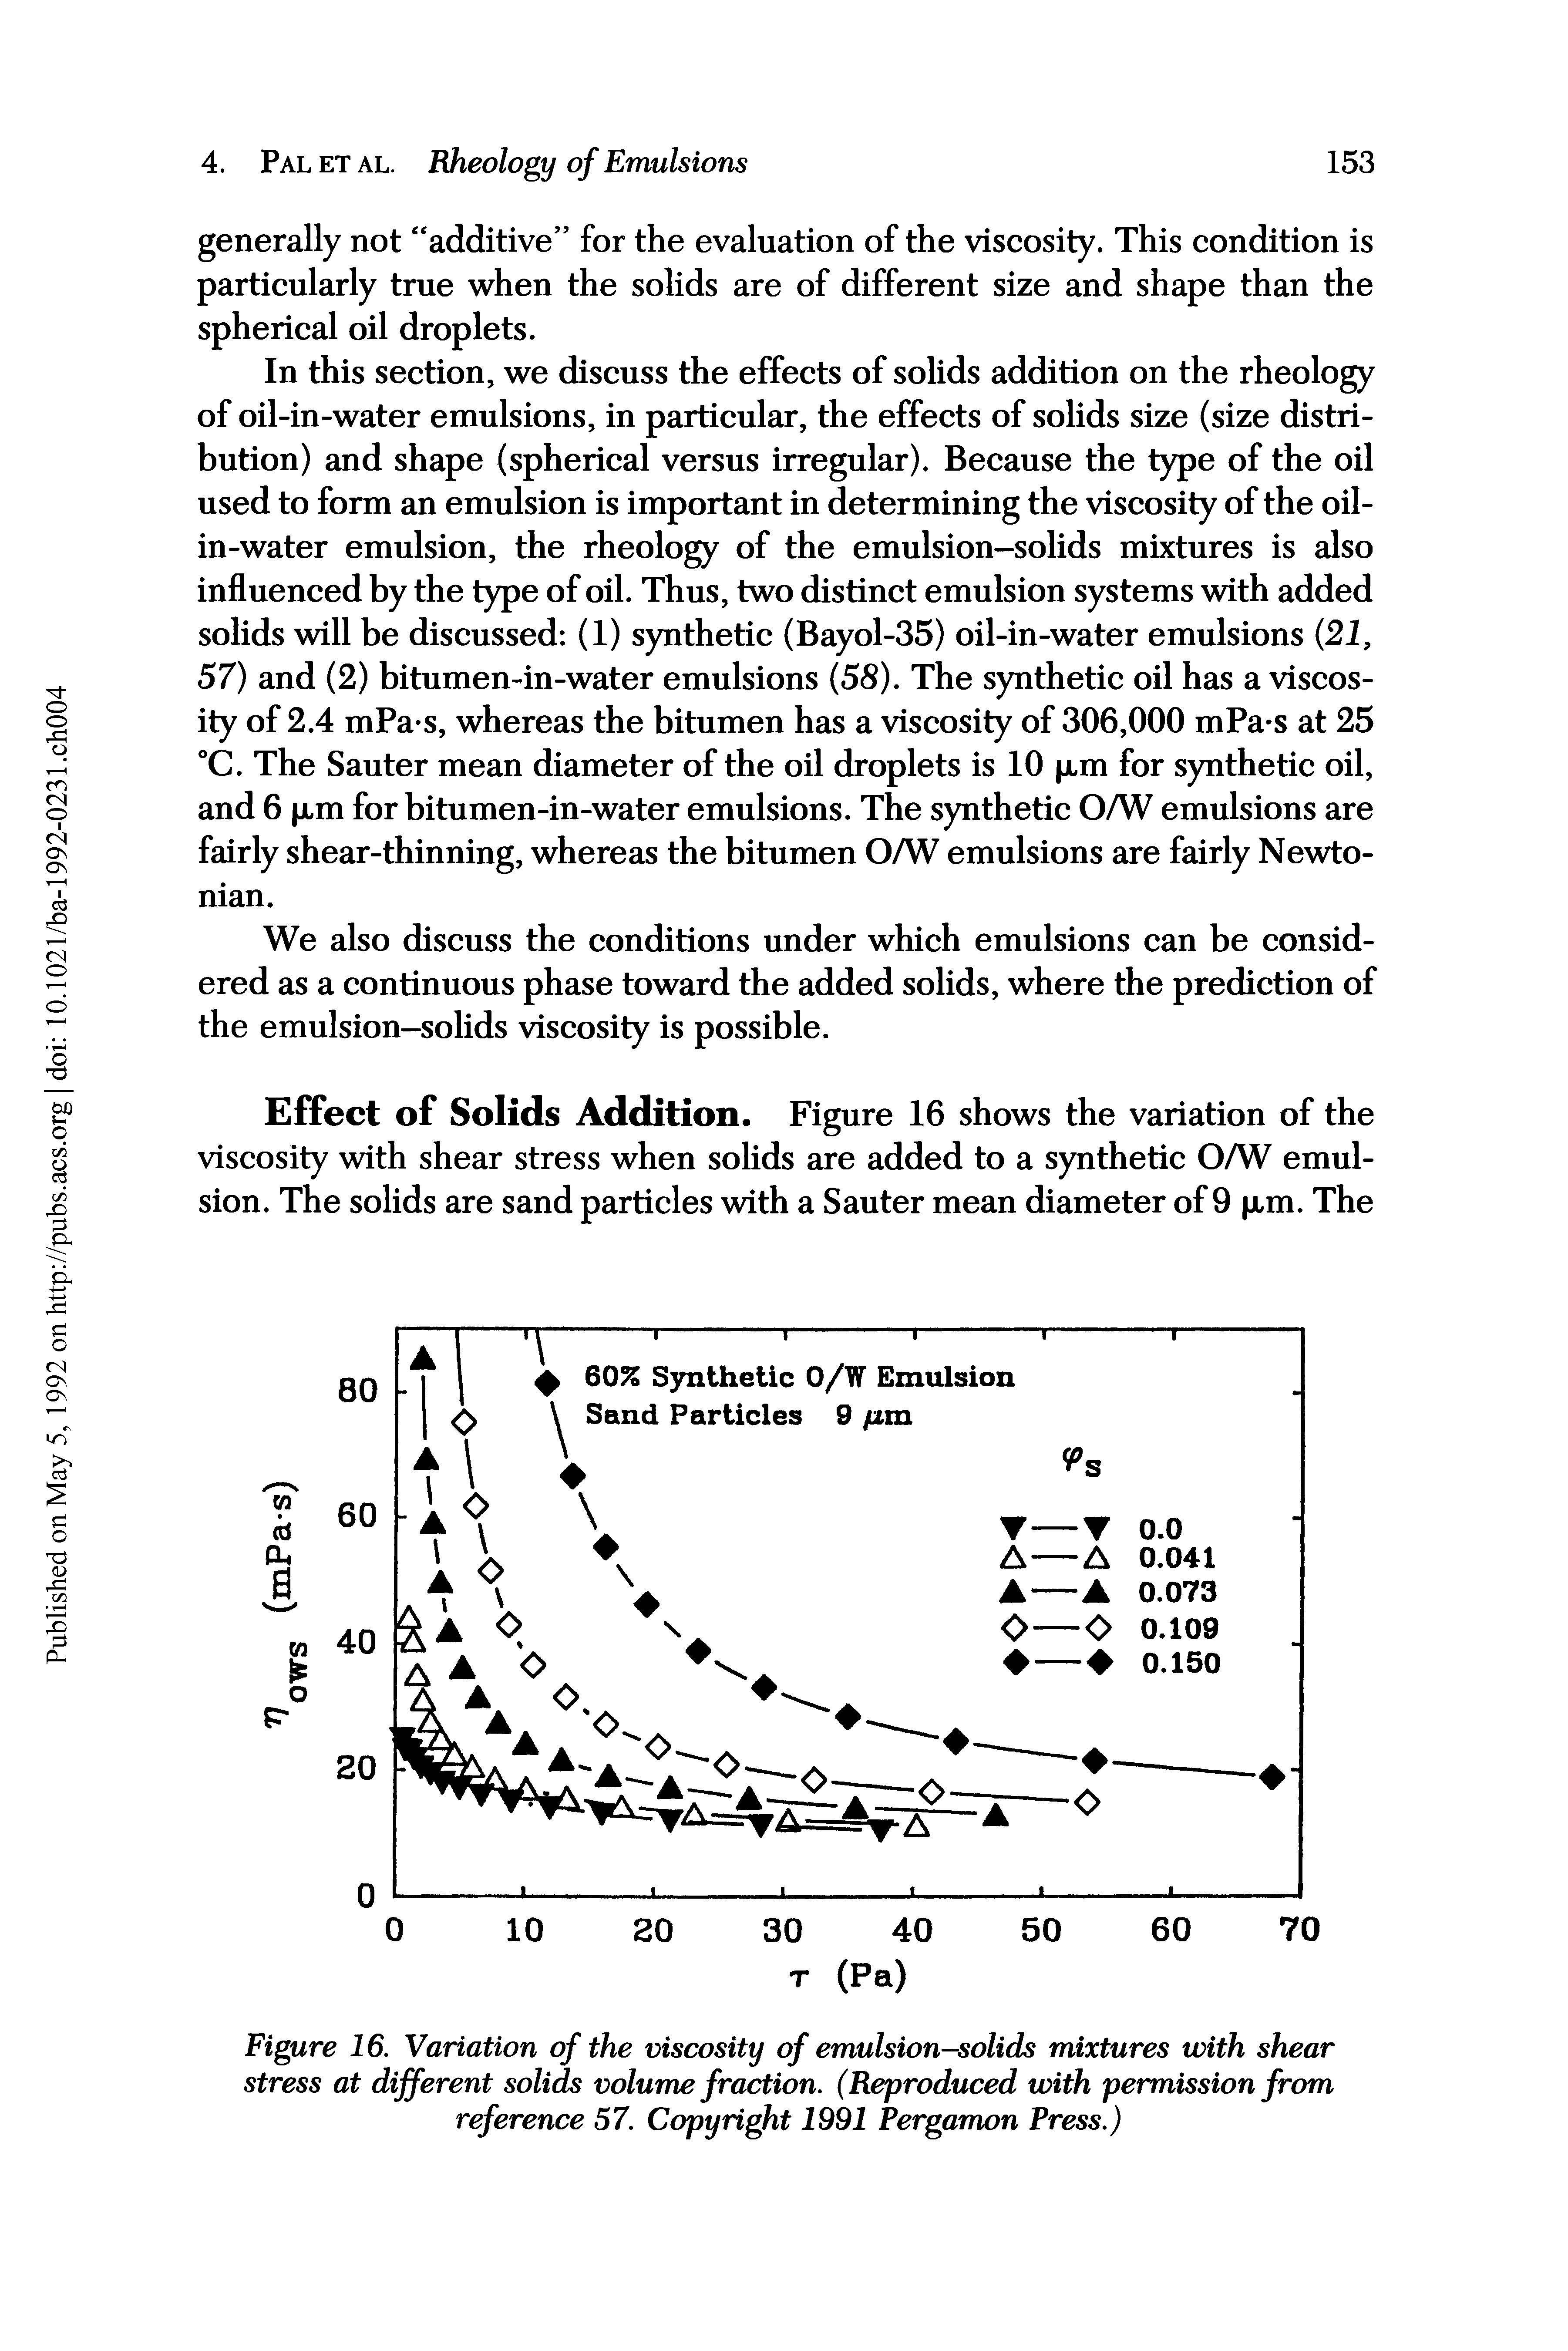 Figure 16. Variation of the viscosity of emulsion-solids mixtures with shear stress at different solids volume fraction. (Reproduced with permission from reference 57. Copyright 1991 Pergamon Press.)...